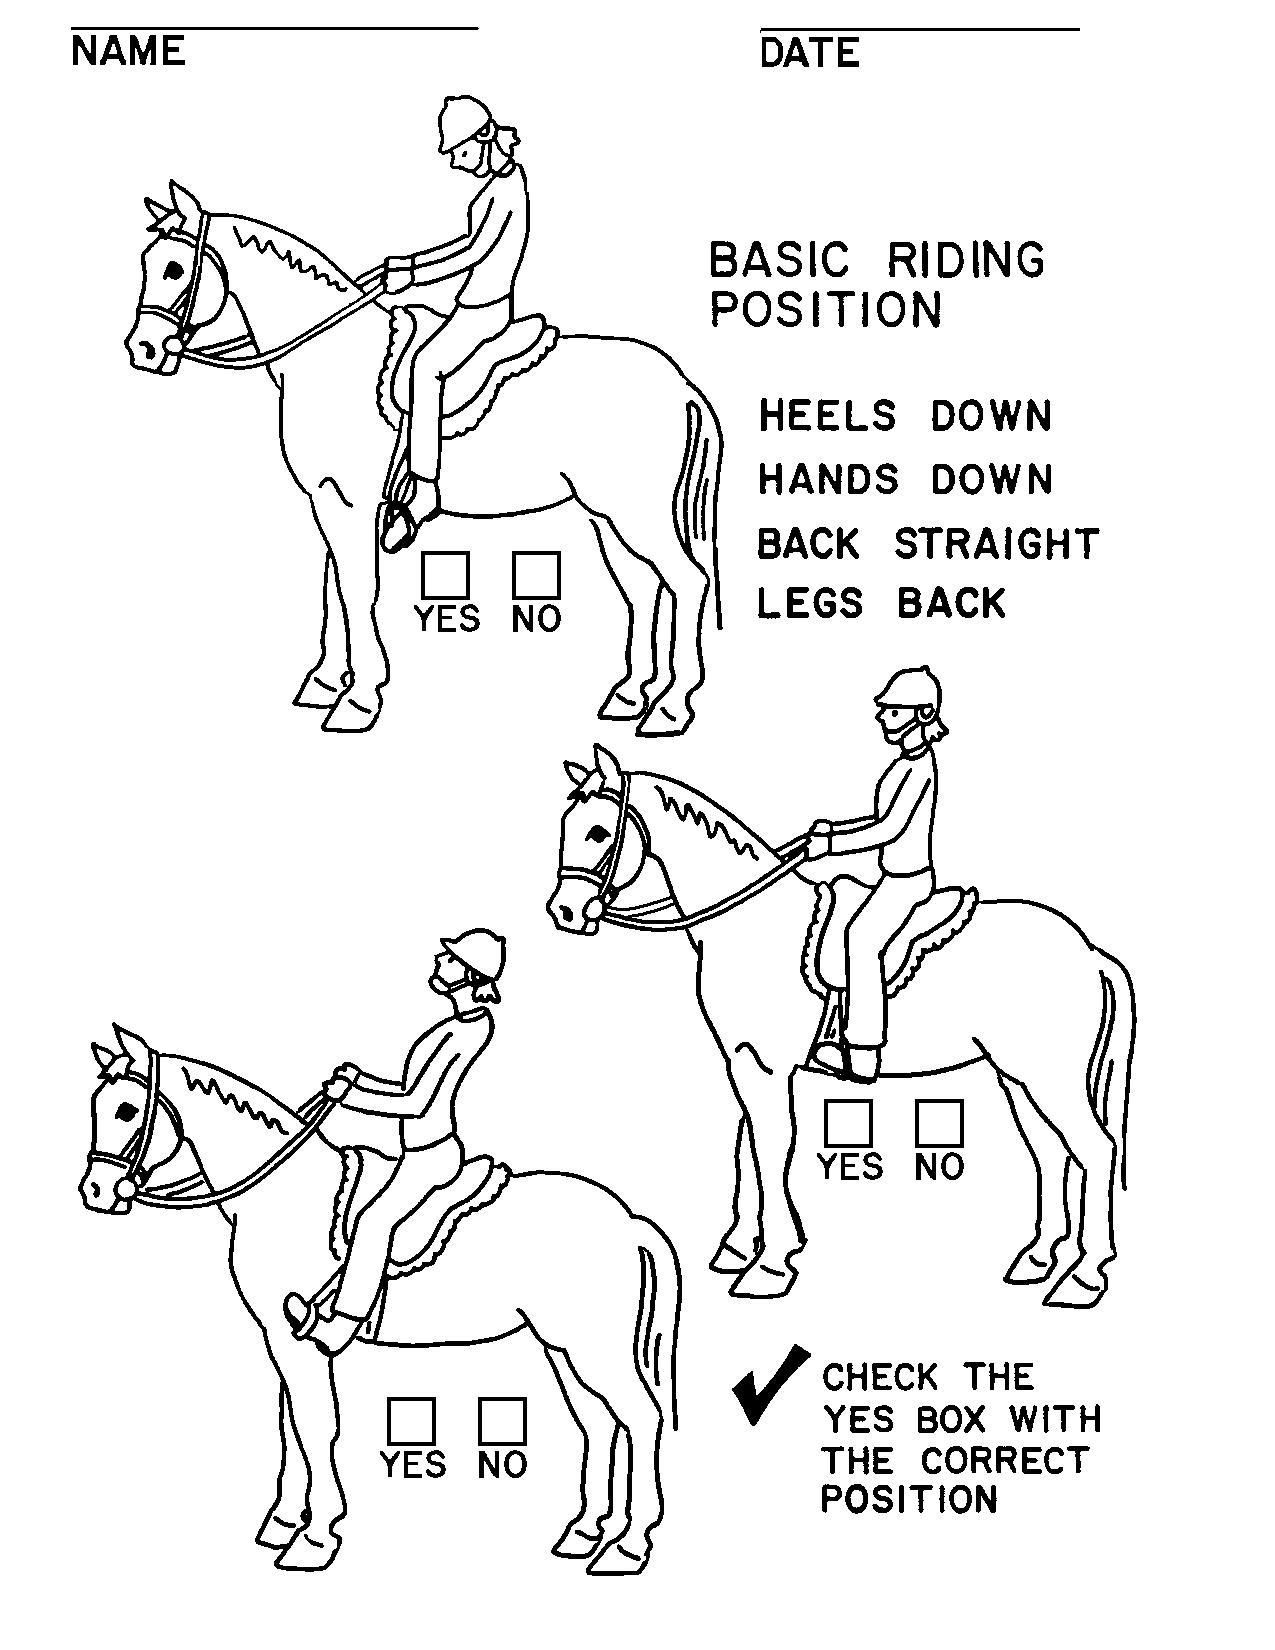 Illustrations Handouts Horse Lessons Horse Camp Riding Lessons